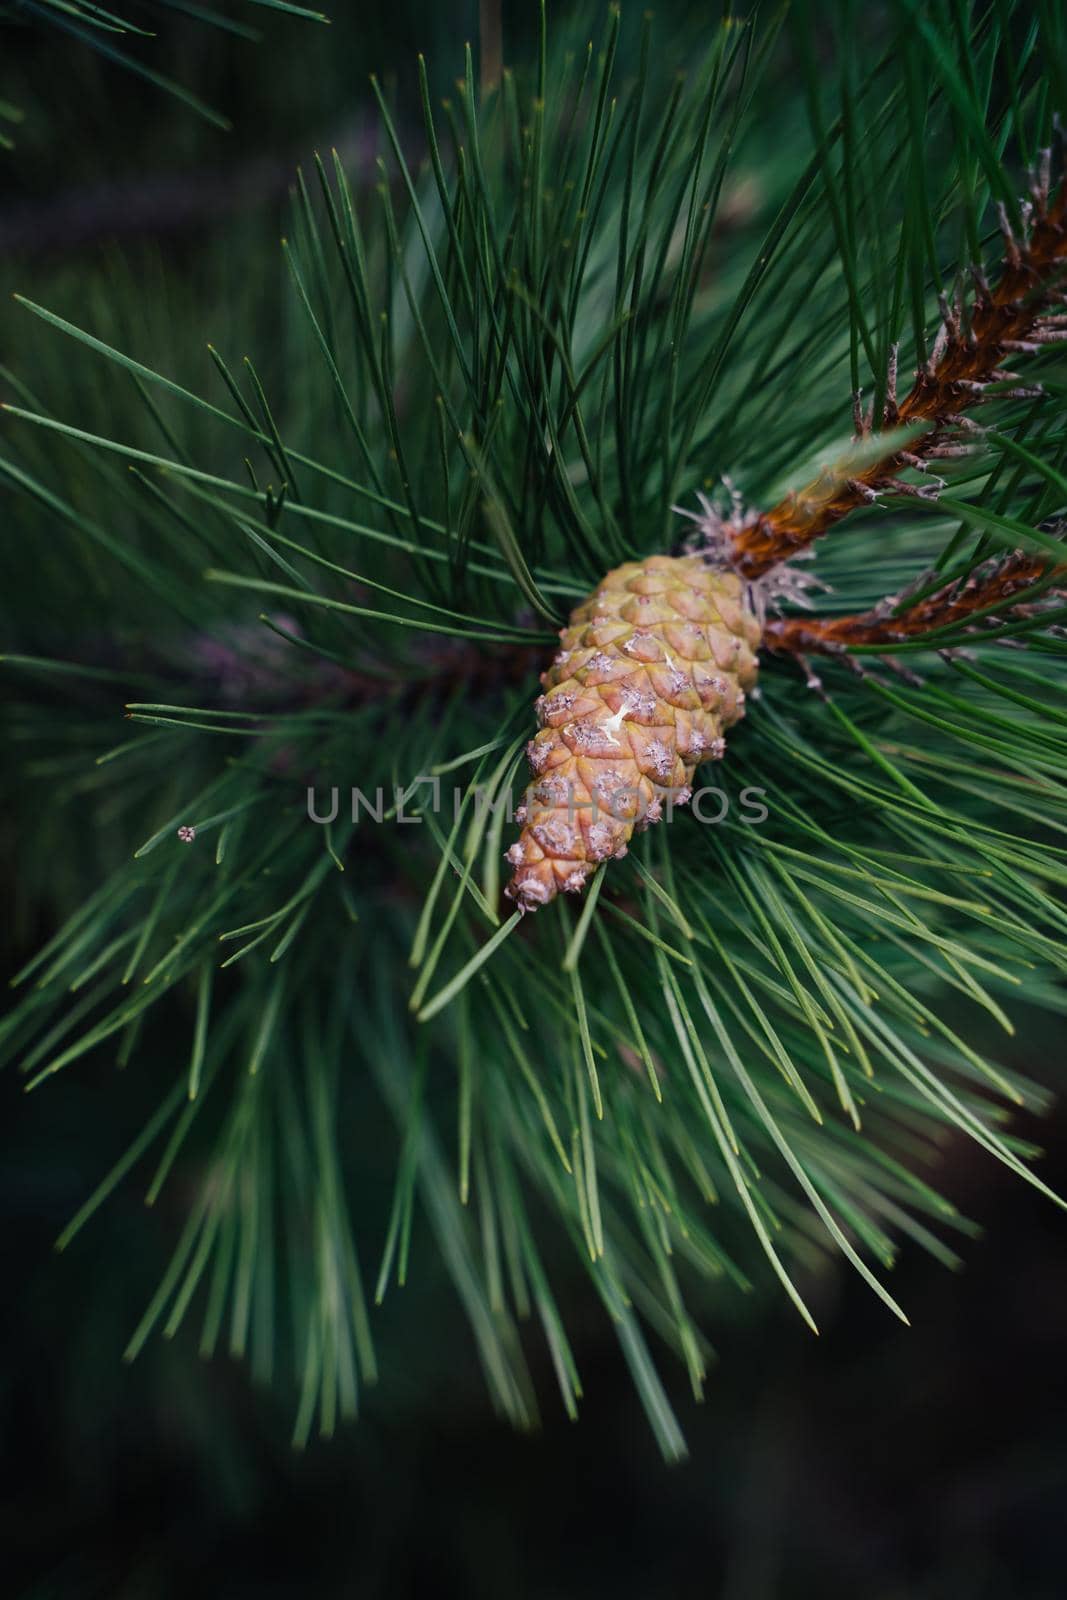 Pine branch with a cone. Close-up of pine needles and a young cone. Natural background. Juicy green needles. Vertical image.